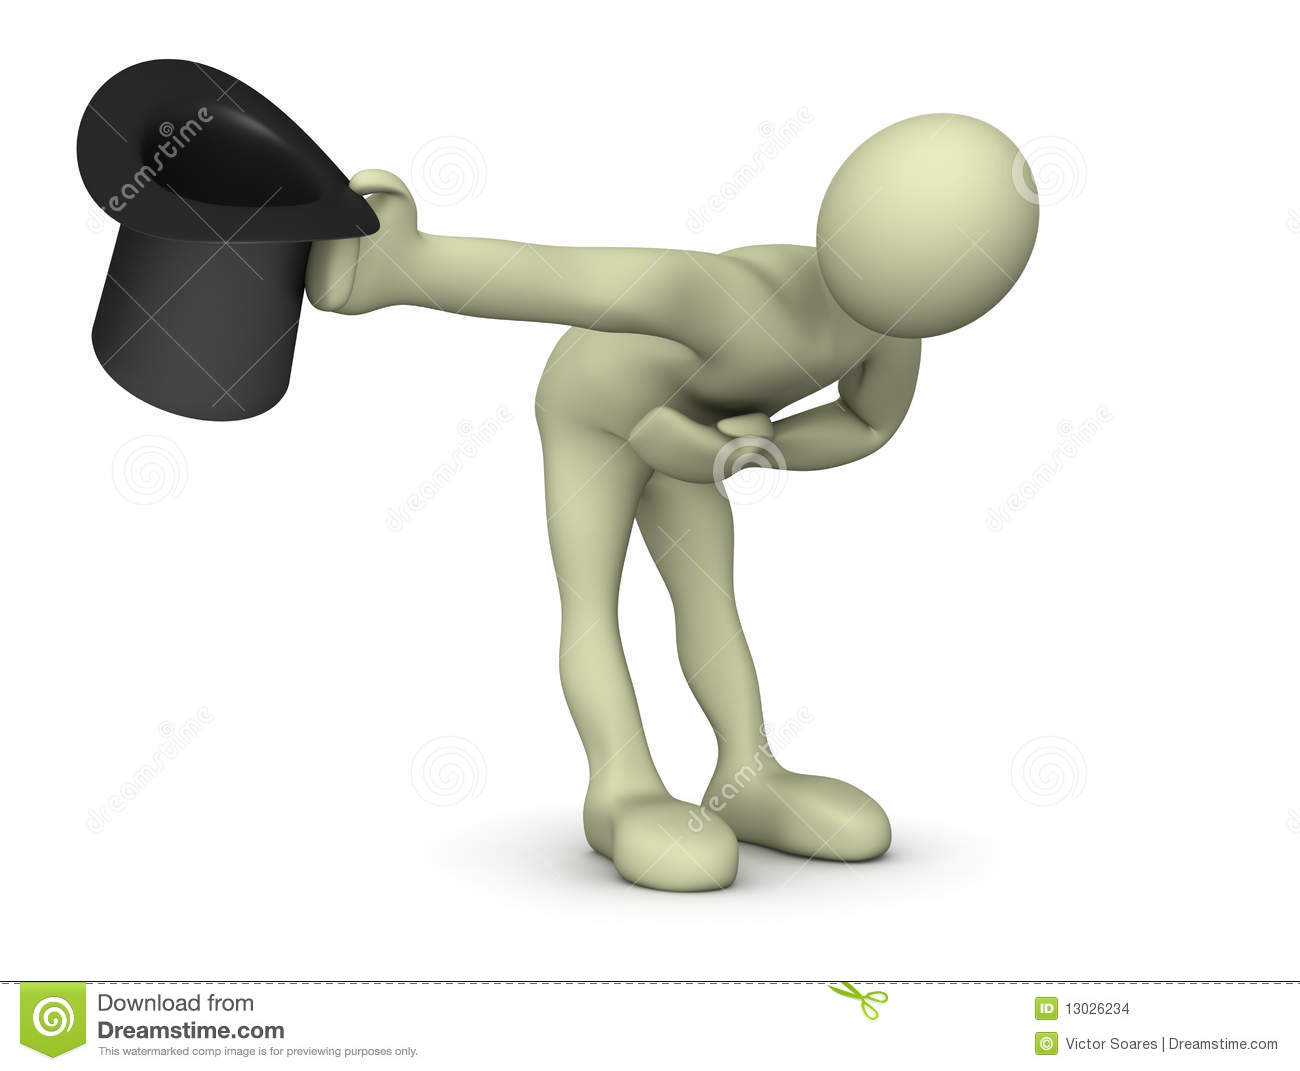 3d Render Of A Humanoid Taking A Bow While Holding A Tophat In His